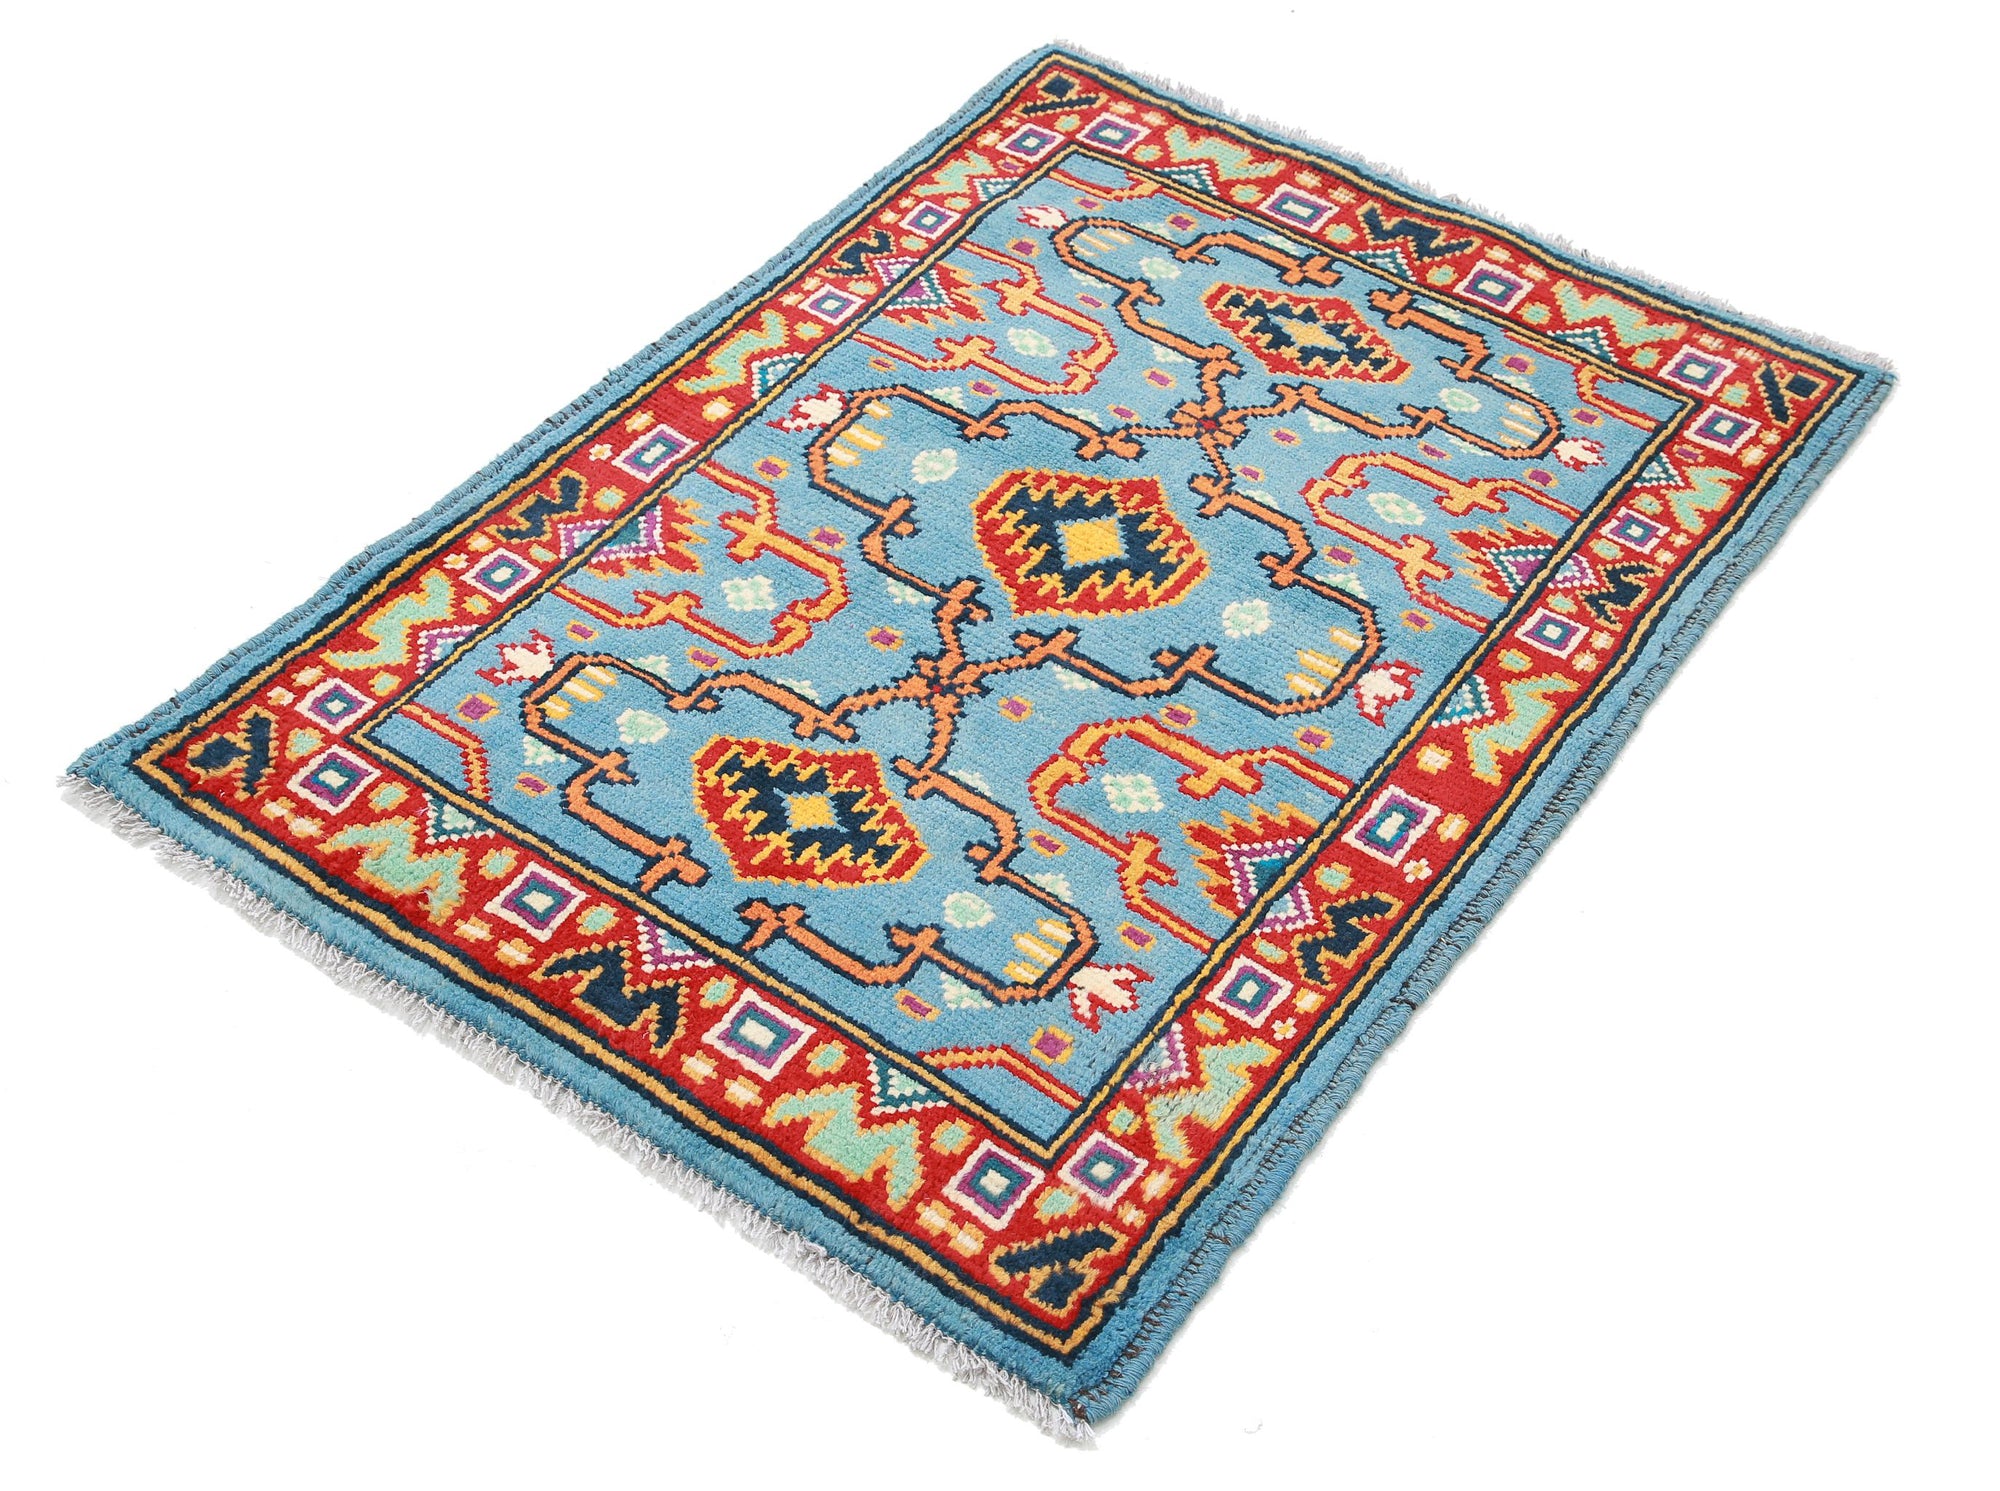 Revival-hand-knotted-qarghani-wool-rug-5014190-2.jpg